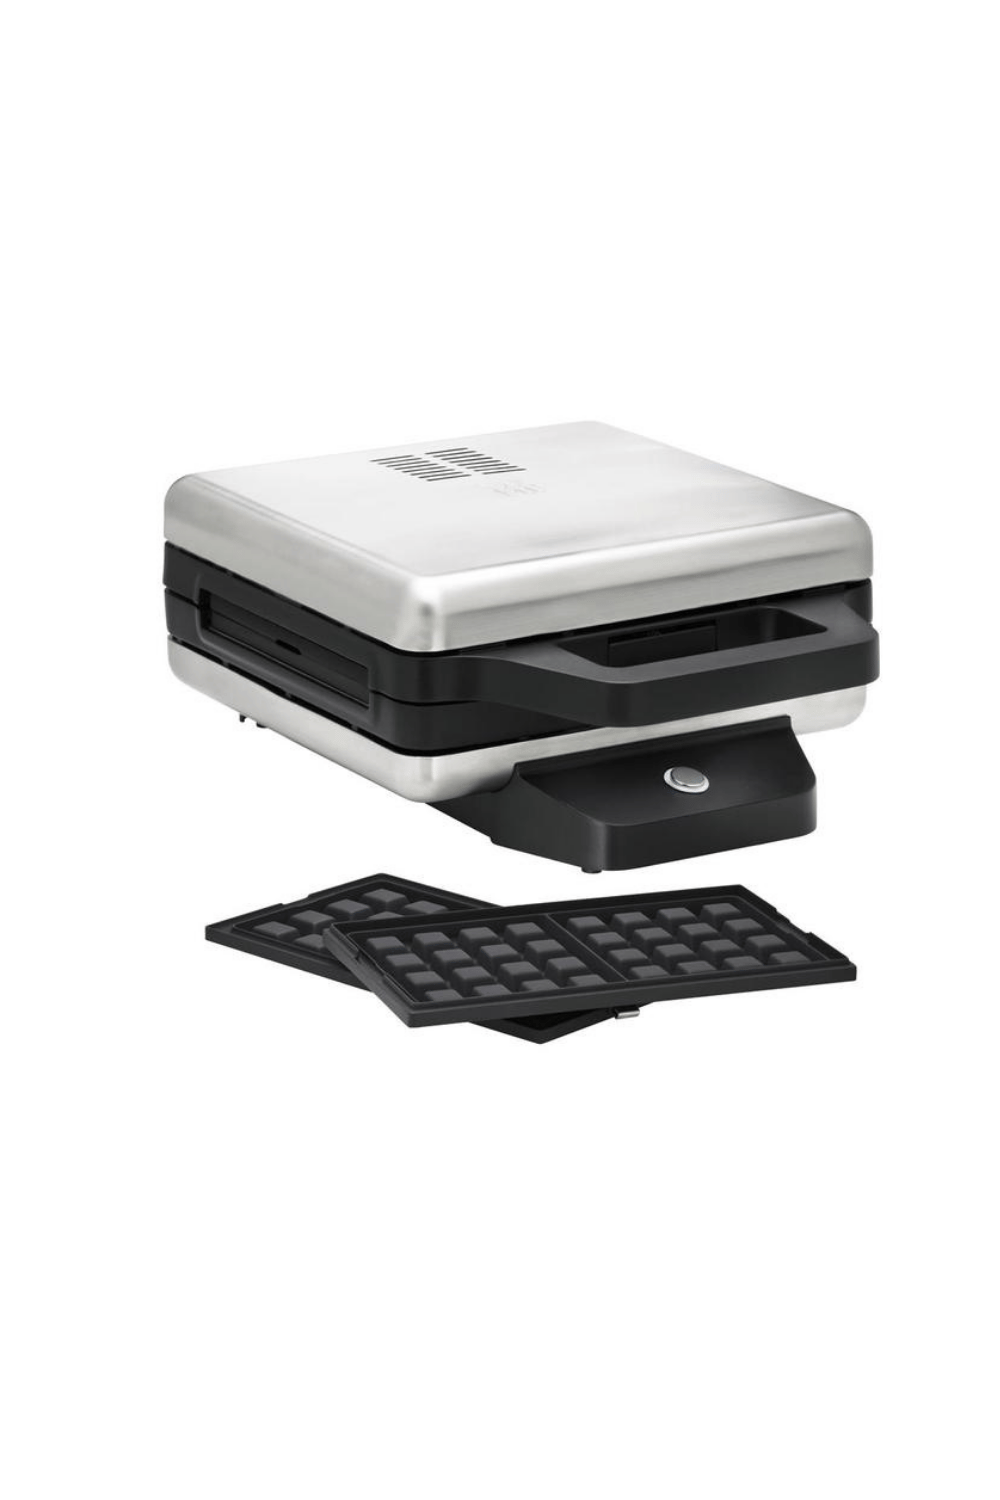 Wmf Lono Snack Master Pro Waffle ve Tost Makinesi 800W (Teşhir & Outlet)